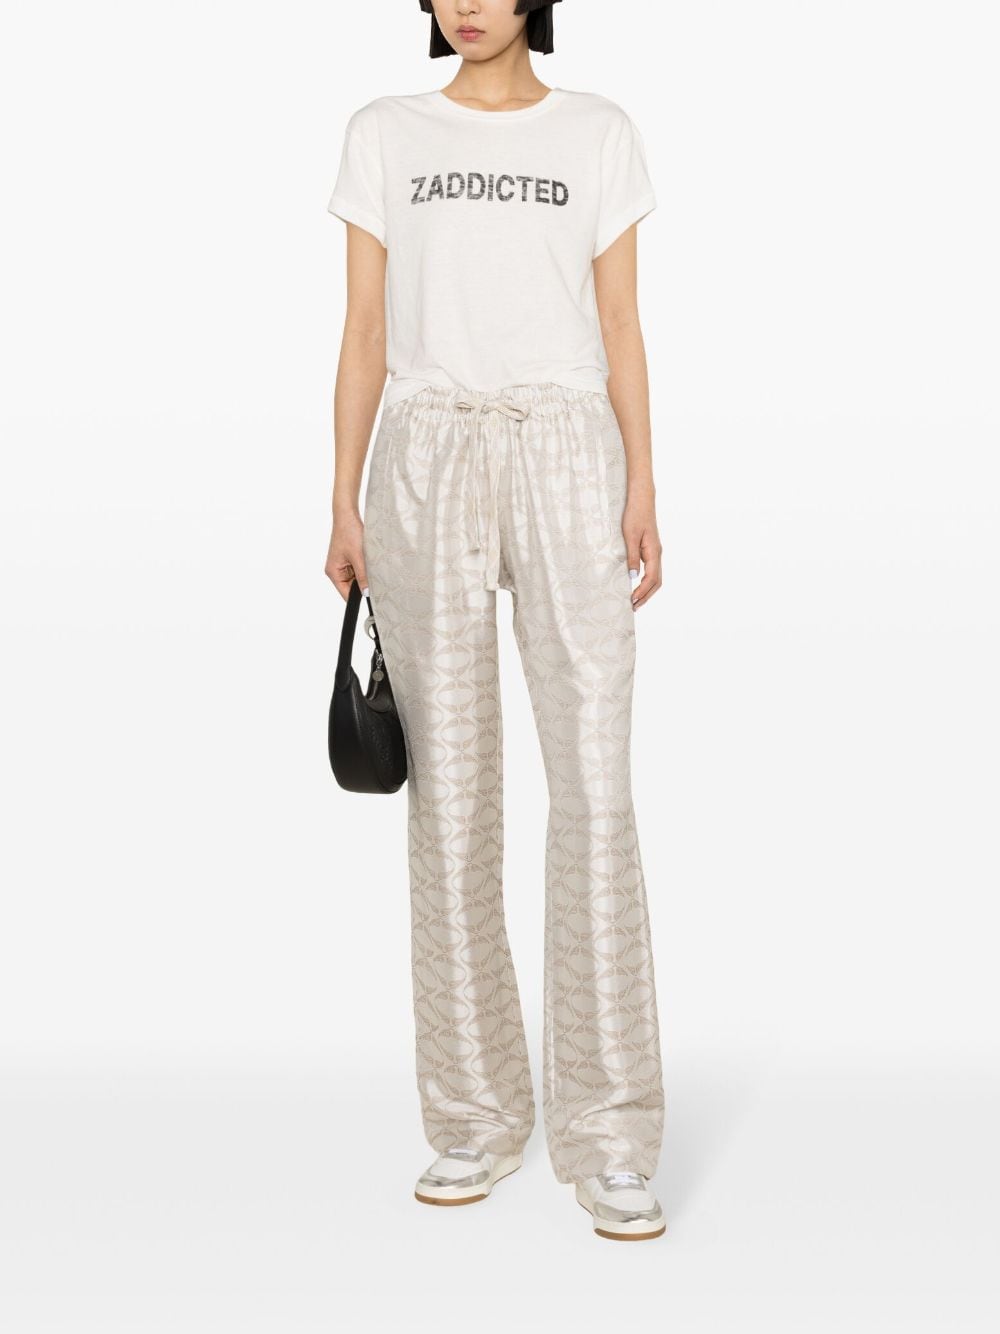 Shop Zadig & Voltaire Zaddicted Mélange T-shirt In 白色